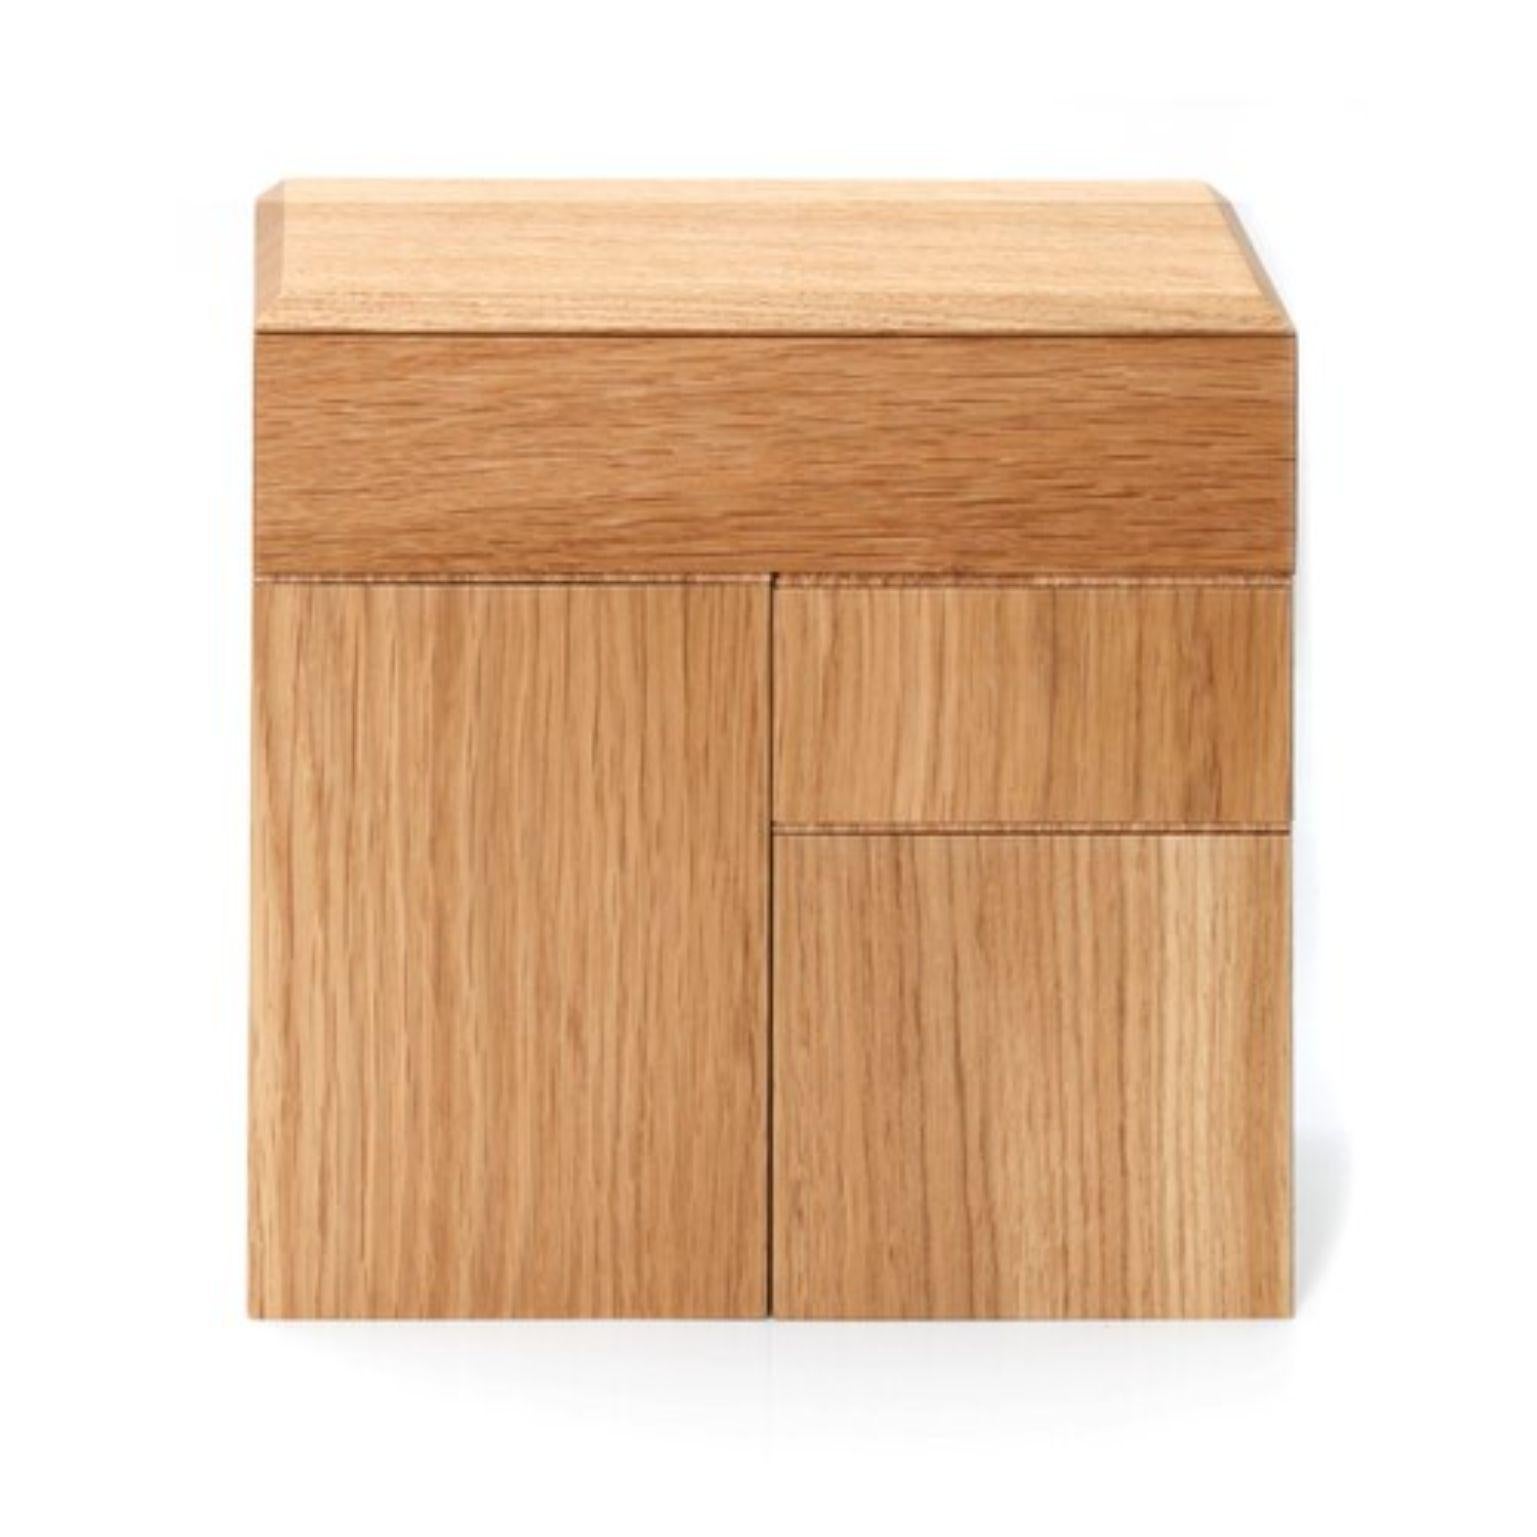 Set of 5 pino boxes by Antrei Hartikainen
Materials: Oak, natural oil wax
Dimensions: D 9, W 9, H 5 / 9,5 / 14cm

A set of three vertical and two horizontal stacking boxes constructed of vividly grained woods. The pino boxes may be arranged in